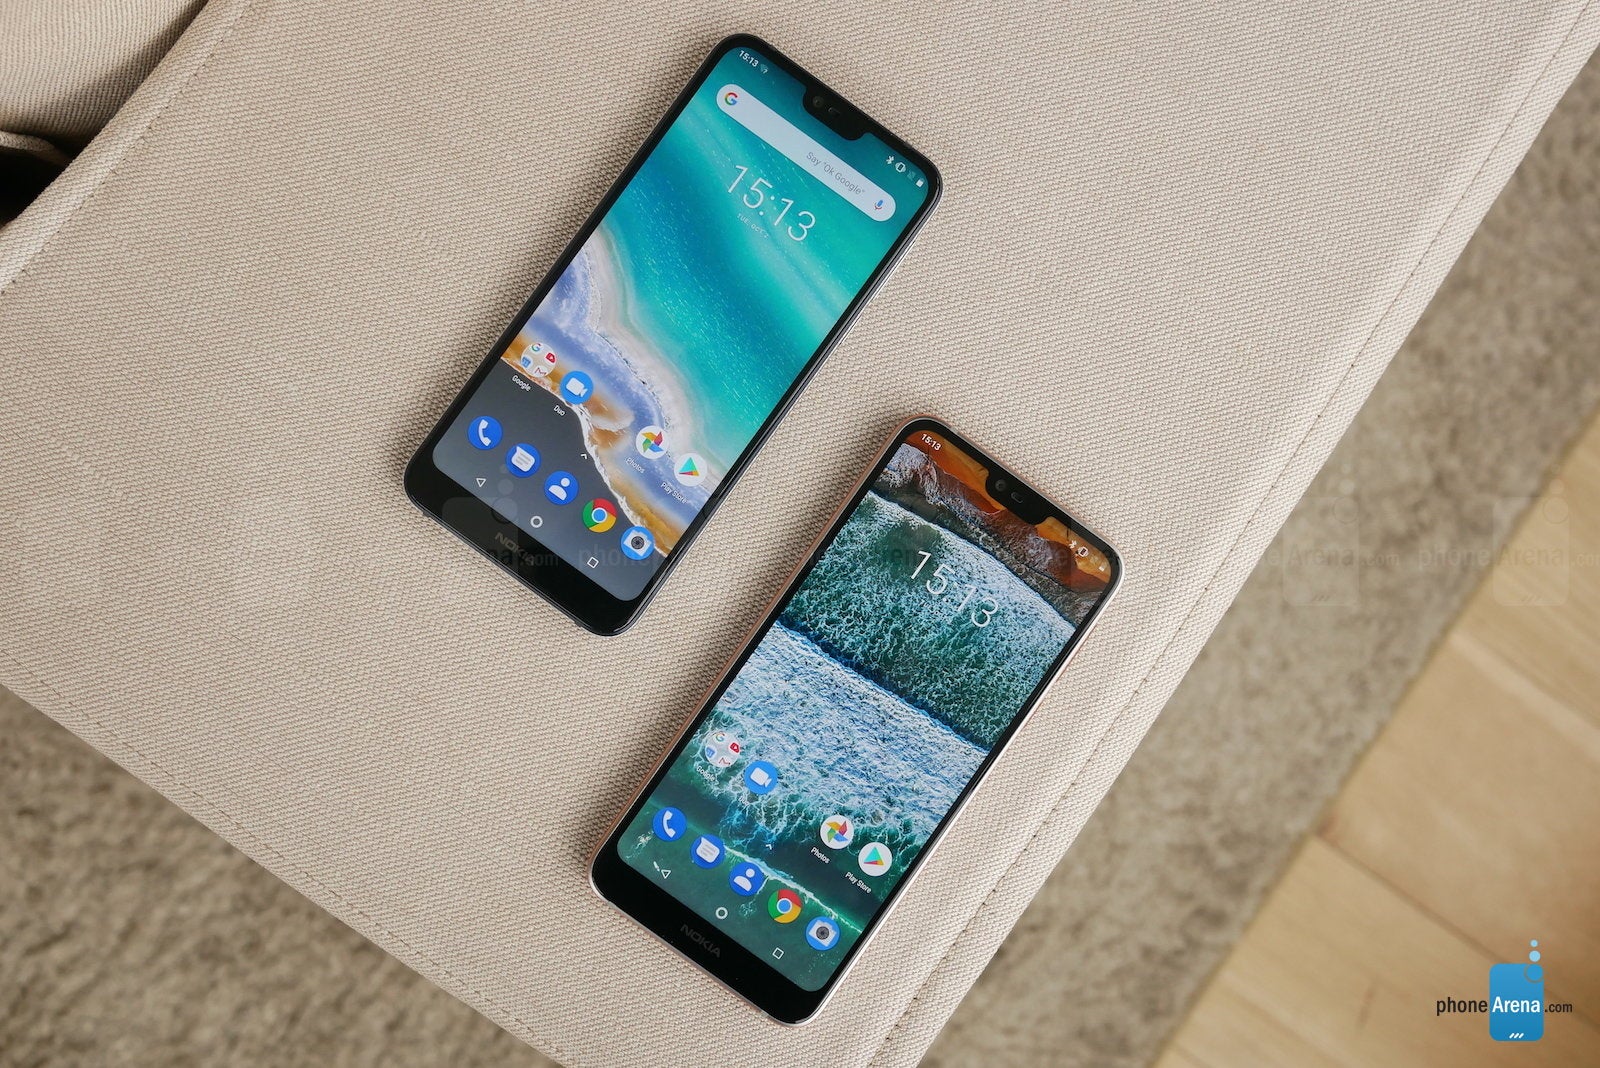 Nokia 7.1 Hands-on: A Mid-Range Beauty with Some Tricks